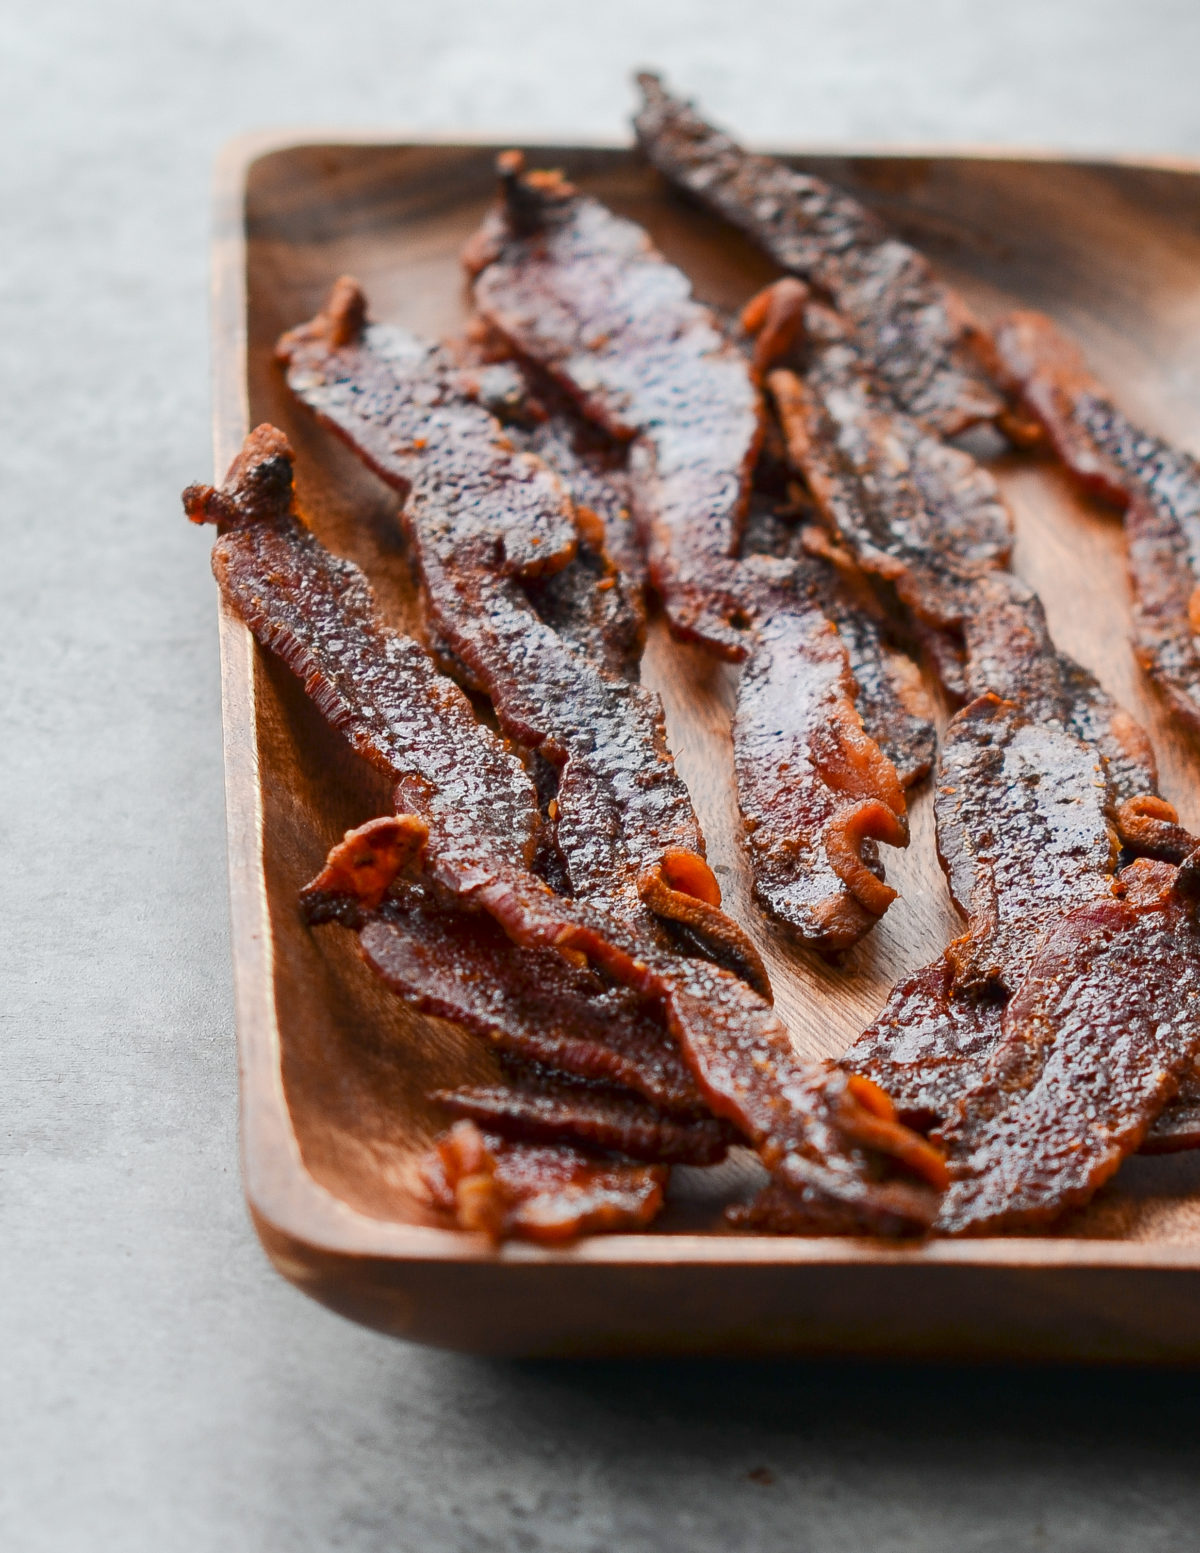 10-Minute Candied Bacon - from Somewhat Simple